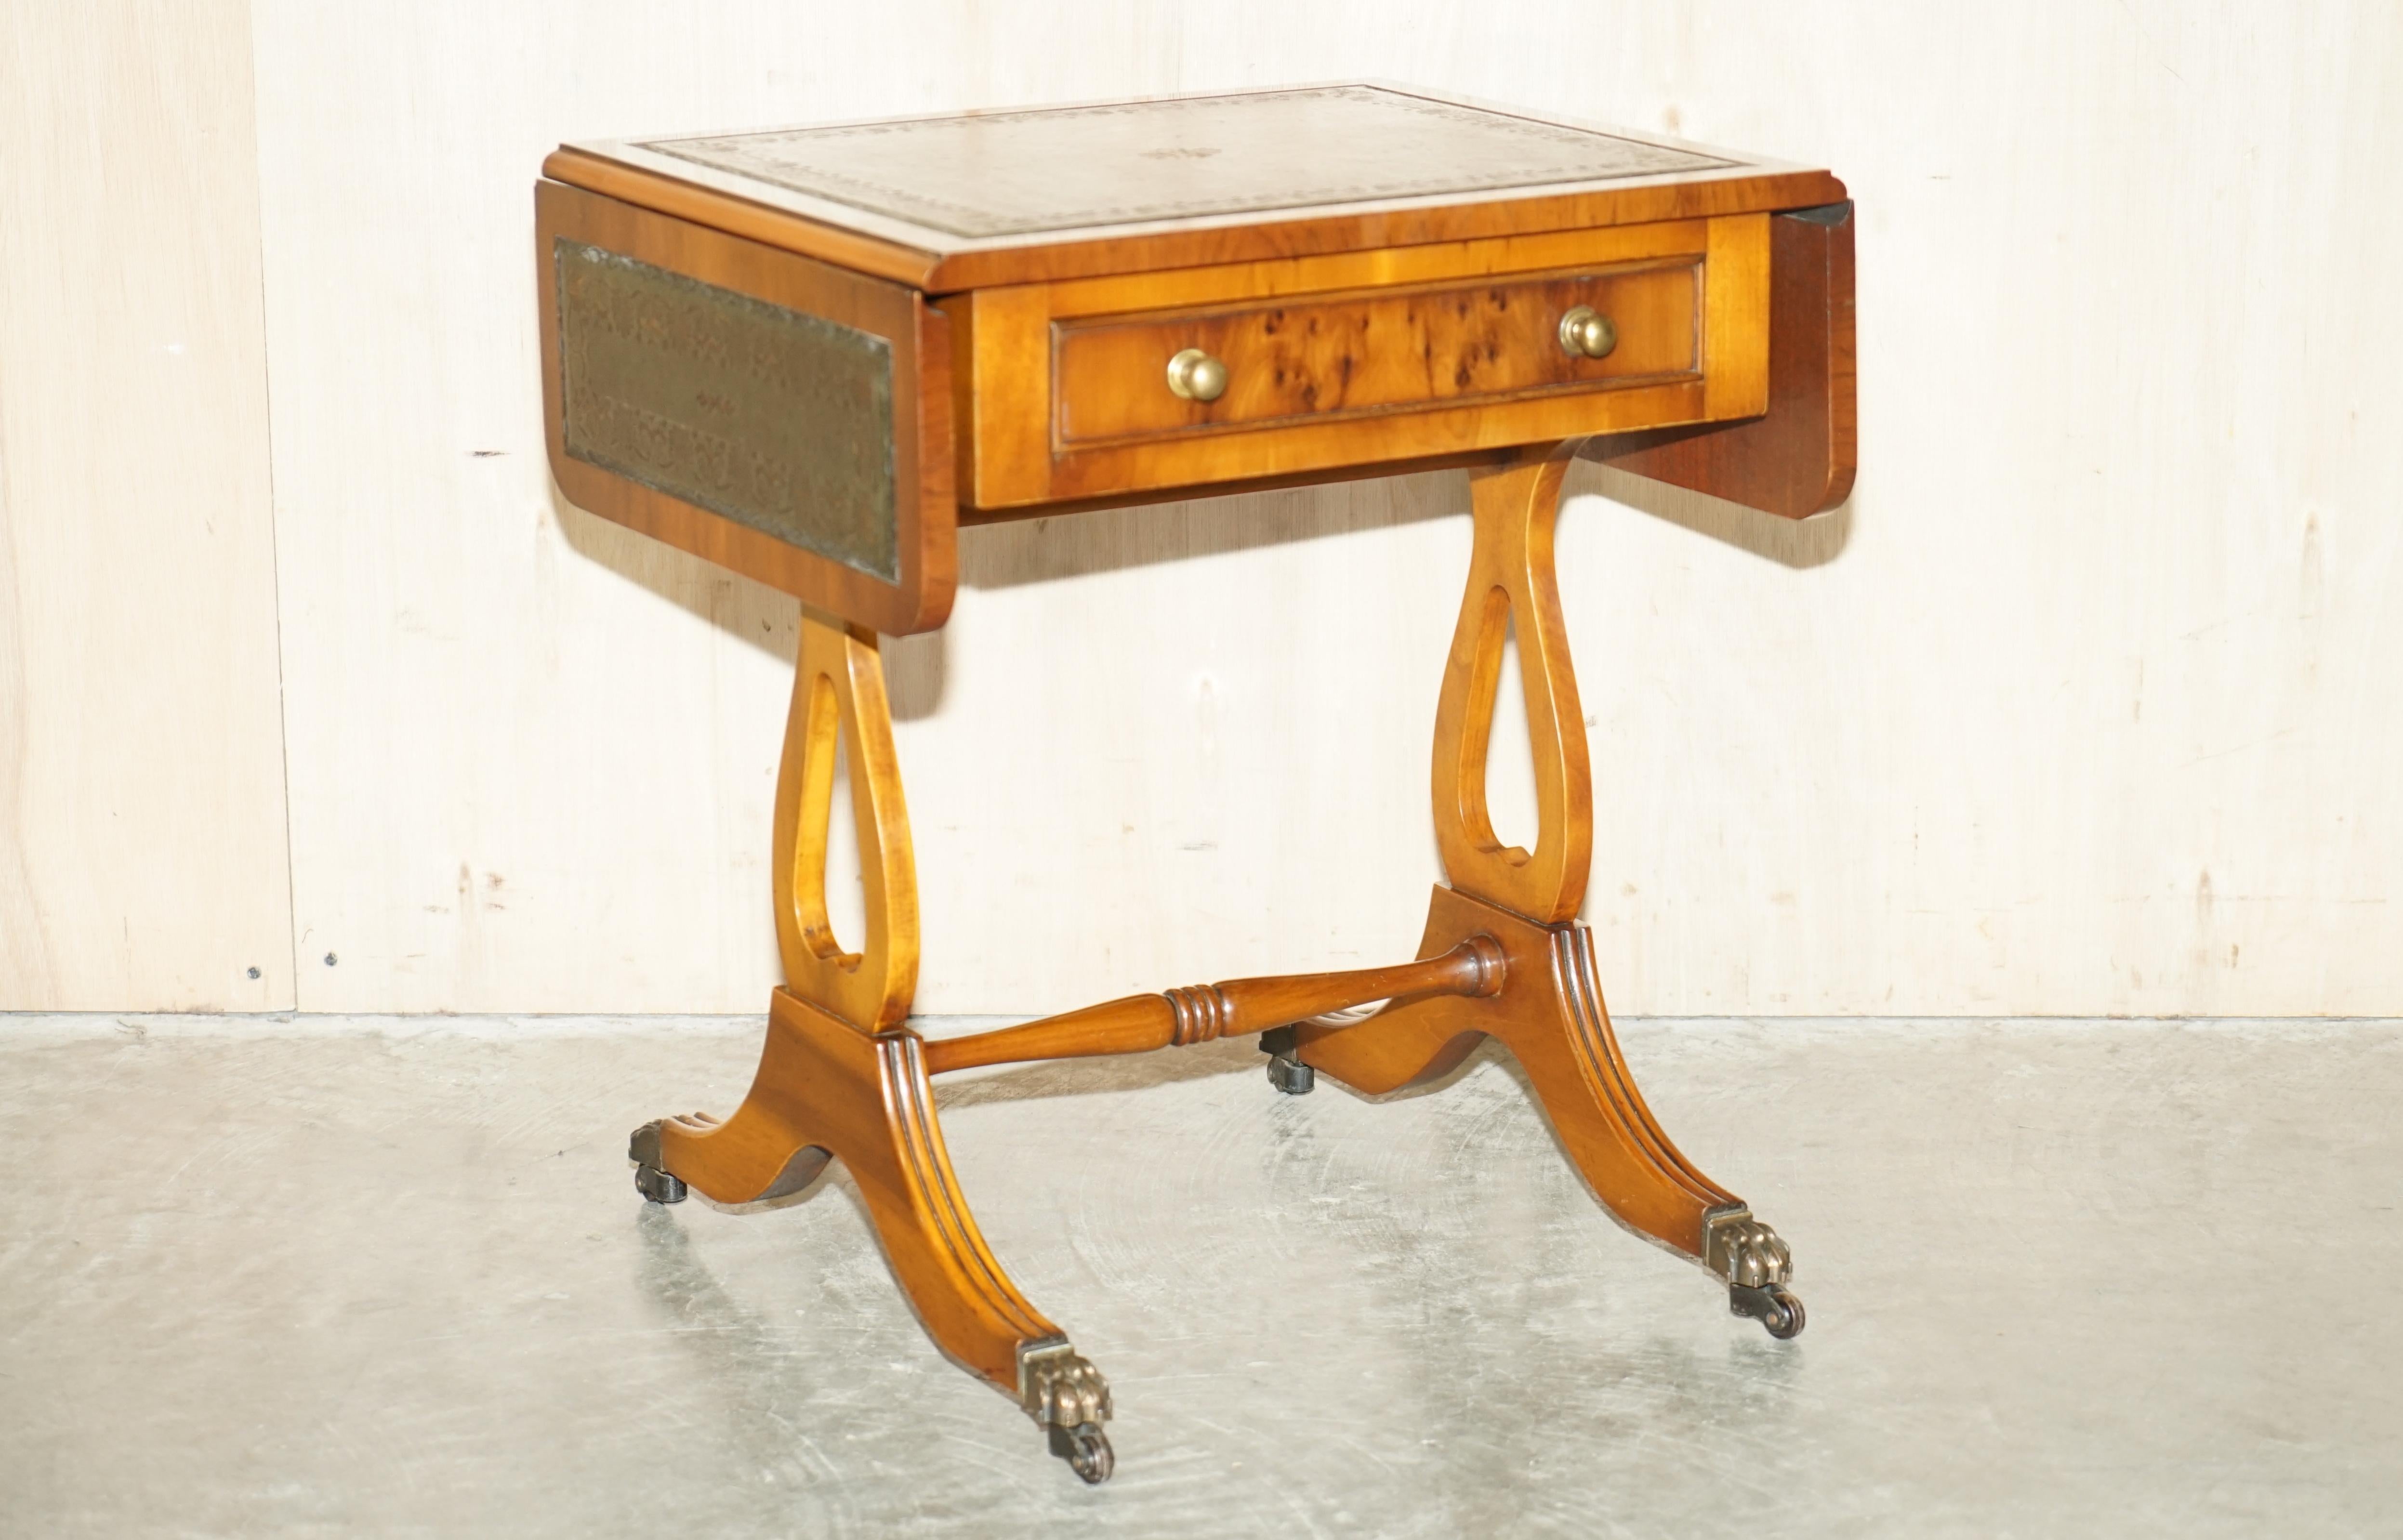 We are delighted to offer for sale this lovely condition vintage Bevan Funnell green leather and Burr Yew Wood extending side table.

This is a very well made and versatile piece with a timber patina to die for, its burr Yew with a green leather